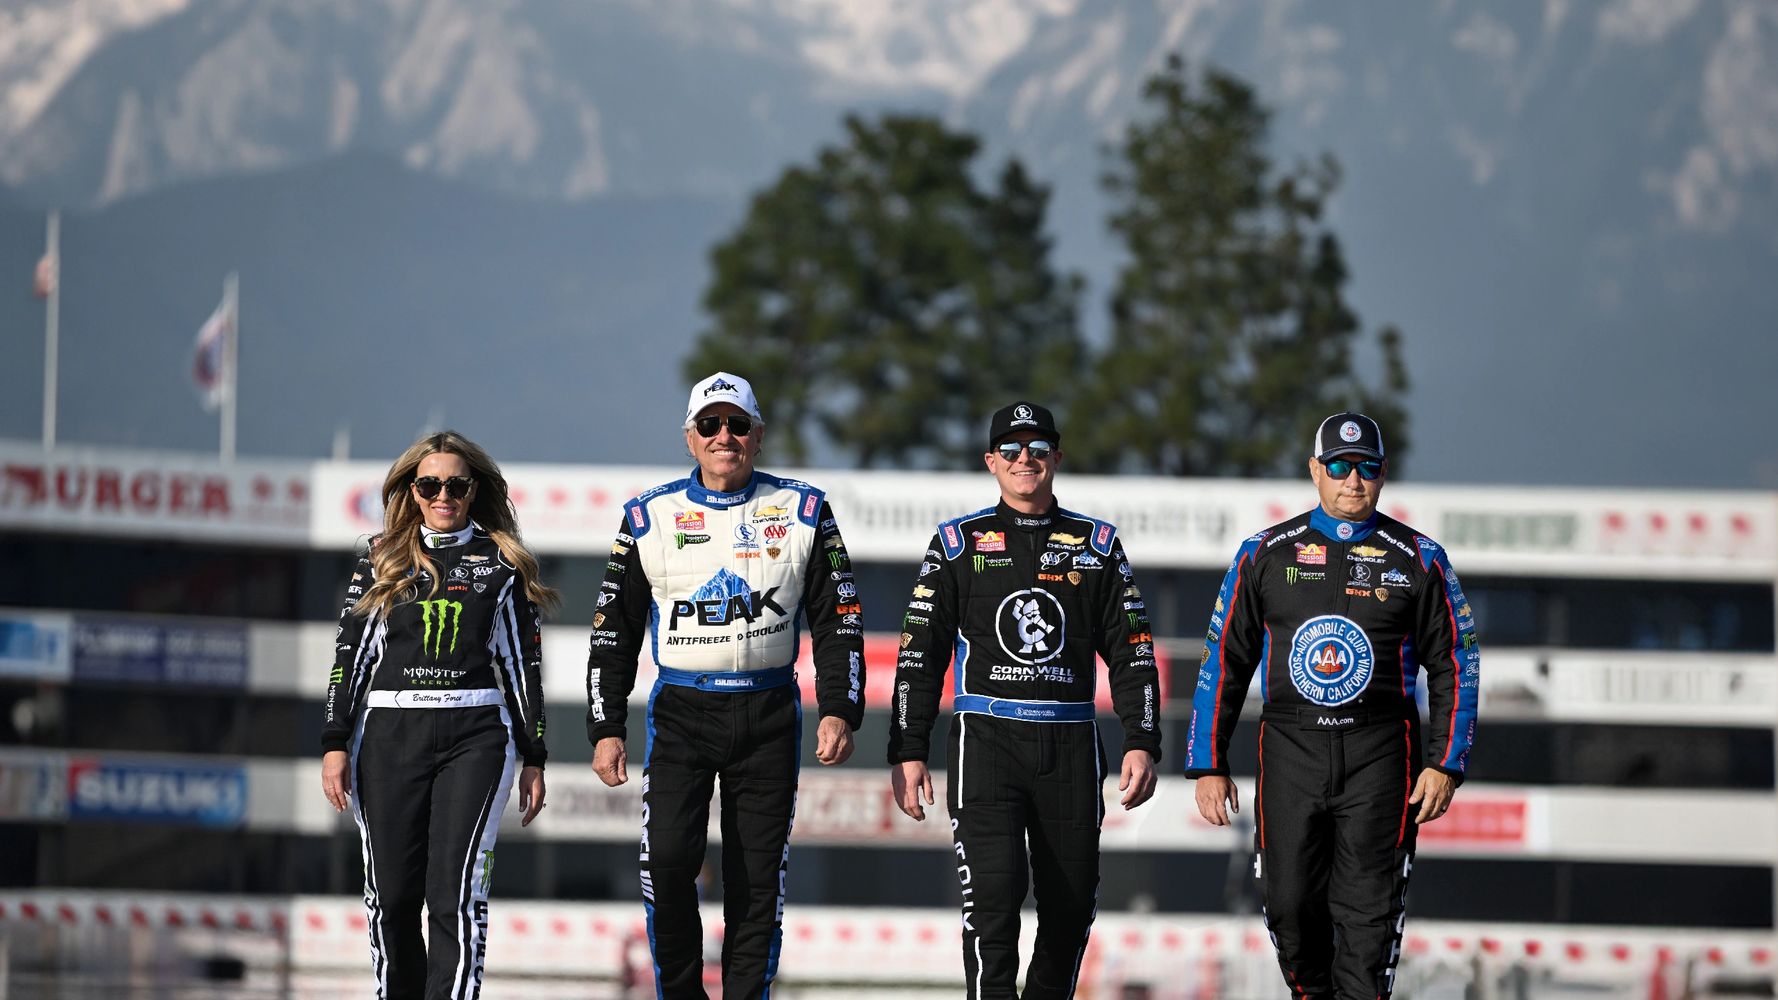 John Force Racing Drivers walking down the race track. L to R: Brittany, John, Austin, and Robert.